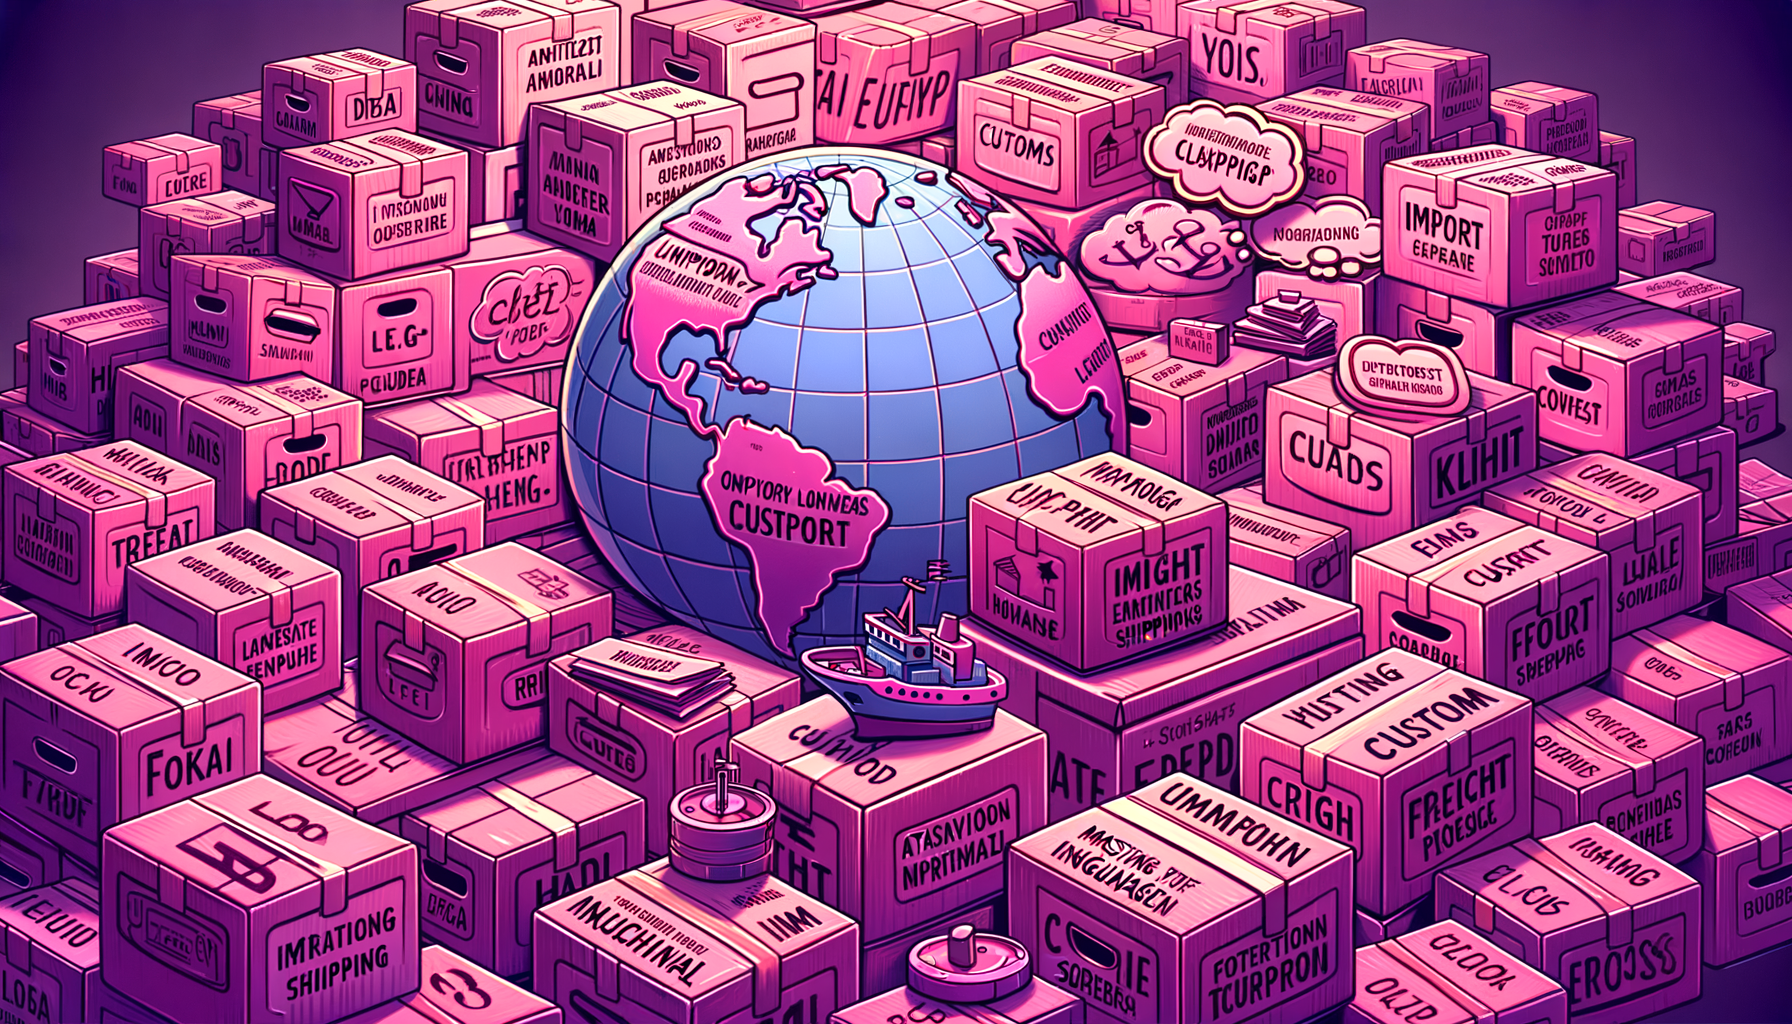 Cartoon-like illustration in fuschia depicting a globe with various shipping icons, symbolizing the essentials of international shipping language.